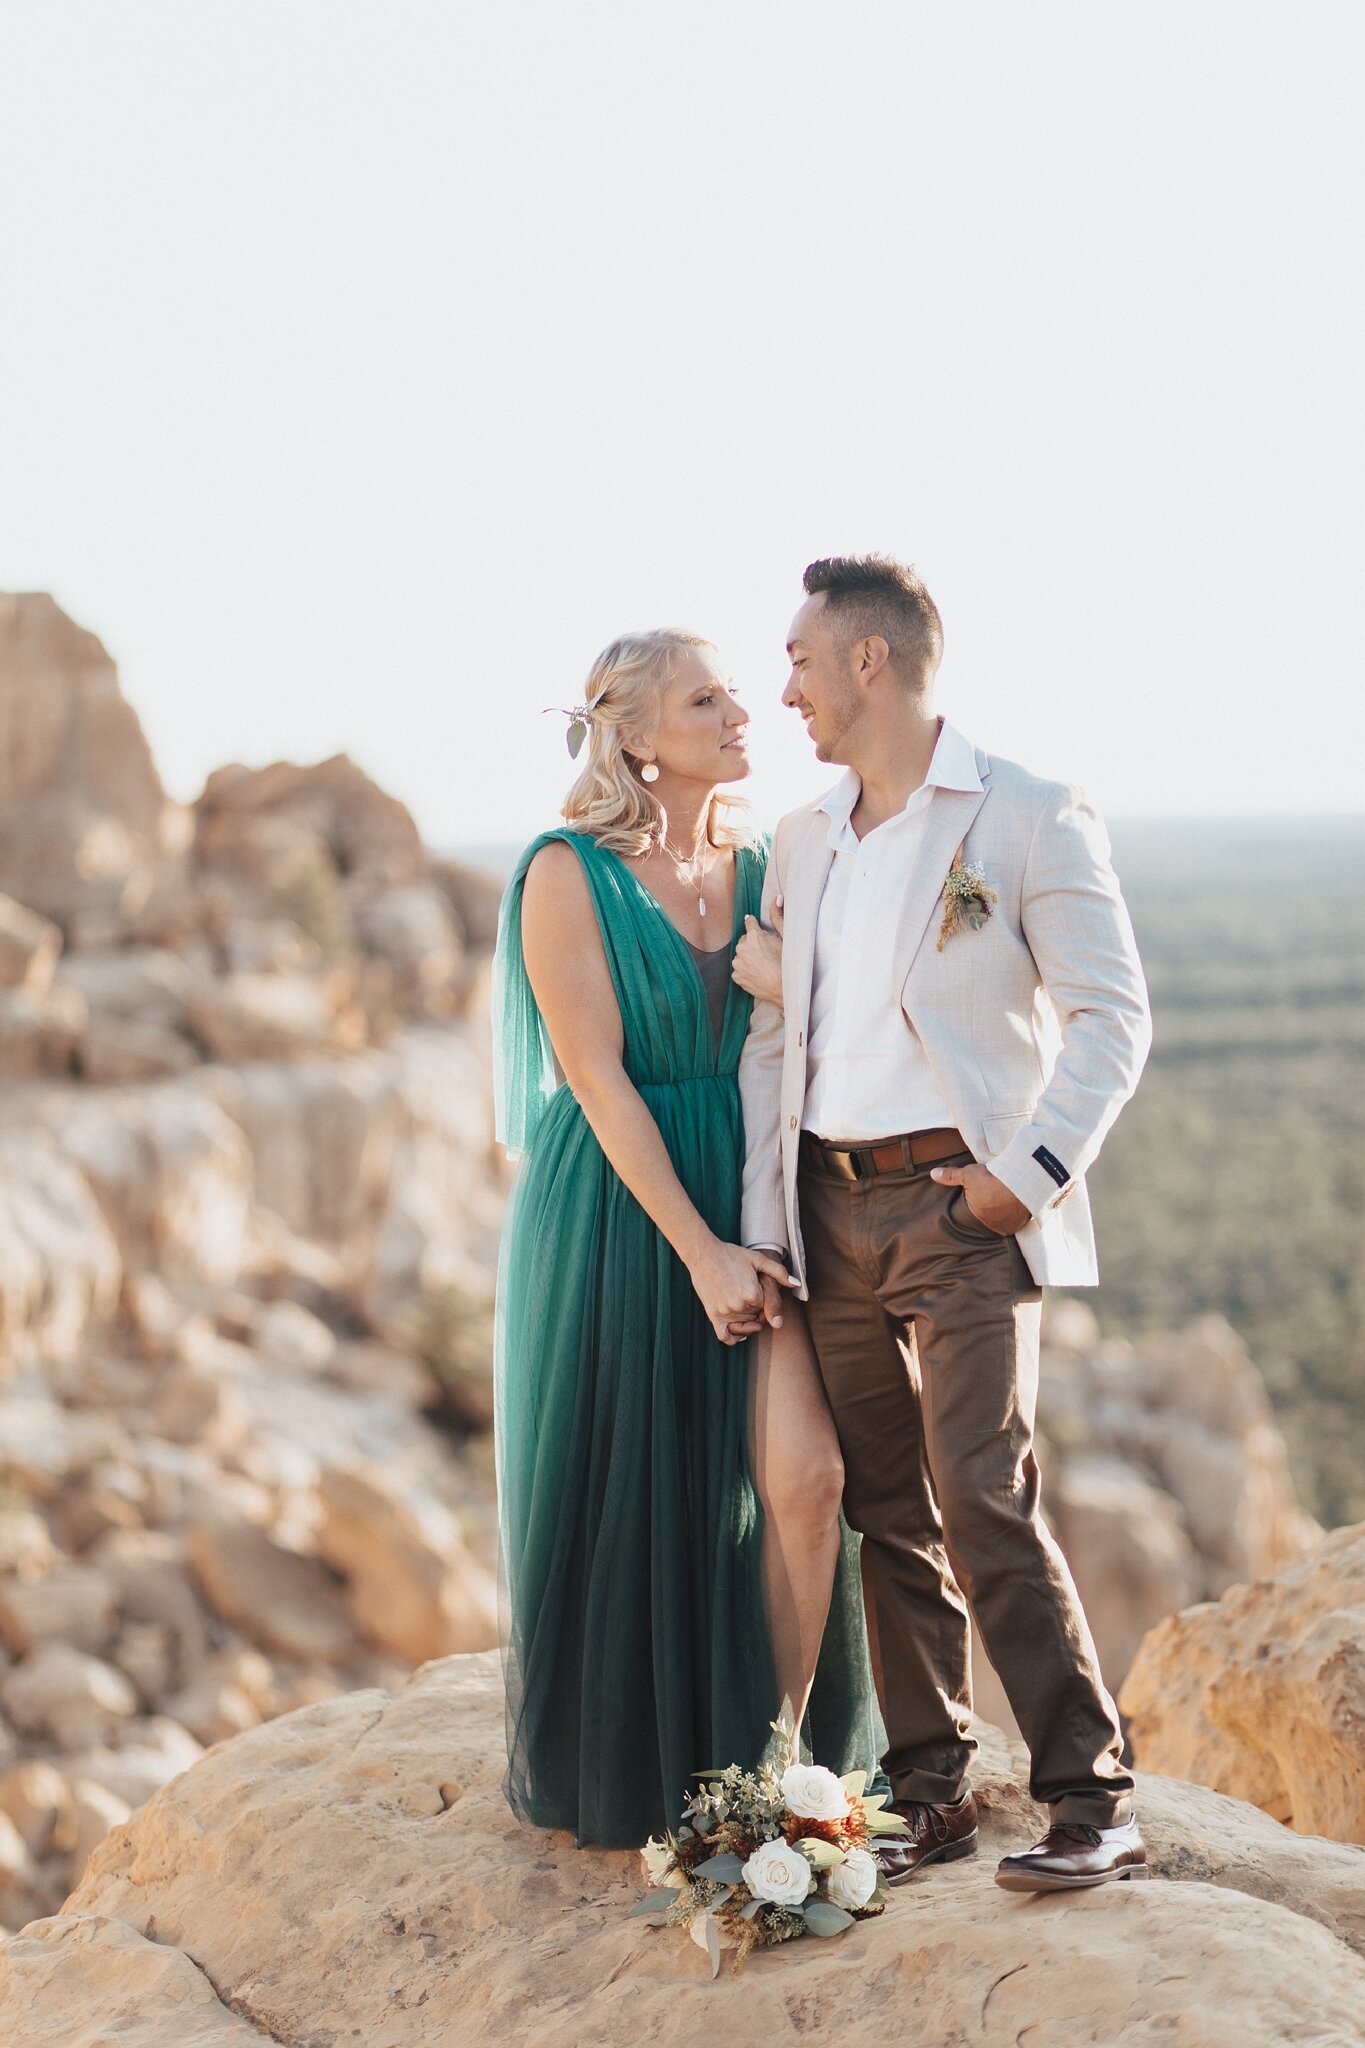 Alicia+lucia+photography+-+albuquerque+wedding+photographer+-+santa+fe+wedding+photography+-+new+mexico+wedding+photographer+-+new+mexico+wedding+-+anniversary+-+styled+anniversary+-+elopement+-+styled+elopement_0020.jpg